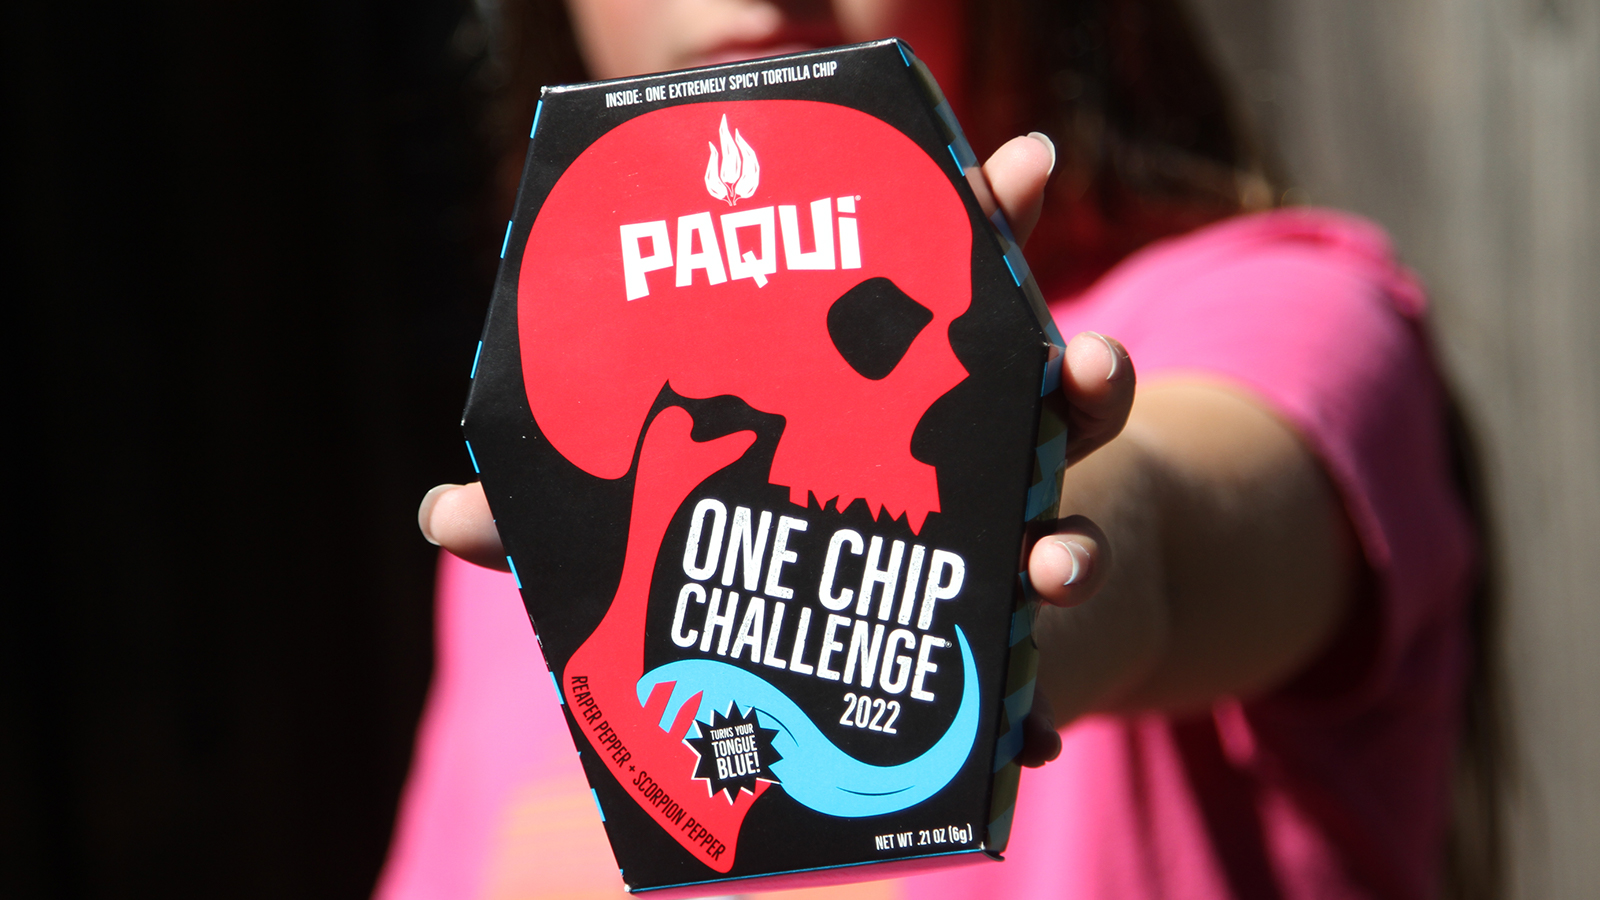 A Single Chip in a Coffin? - Paqui's One Chip Challenge